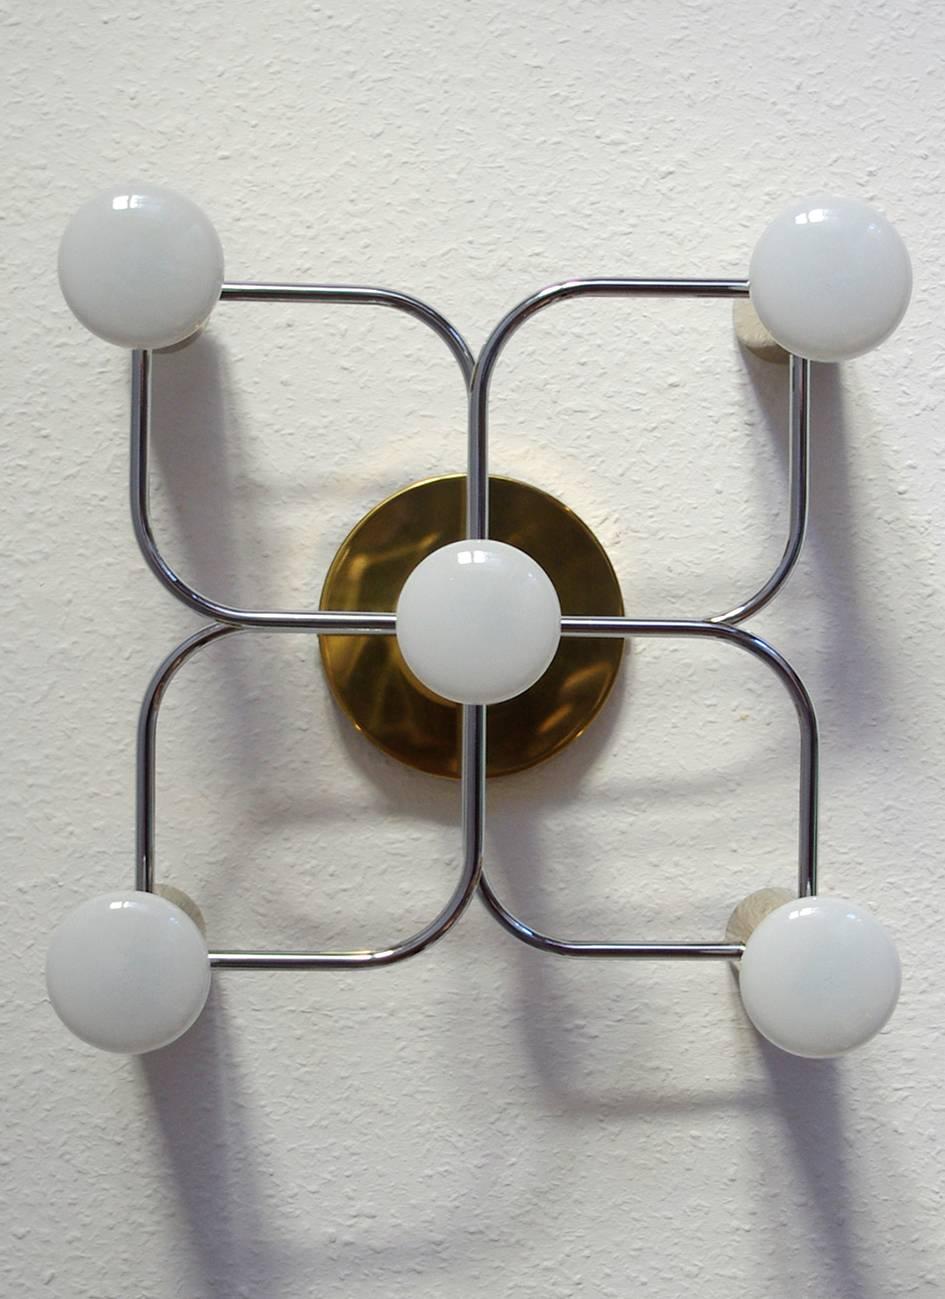 Beautiful sculptural Sciolari style ceiling or wall flush mount by Leola.
Germany, 1960s.
Polished brass and chrome version. Measures: Height 13.8 inches, width 13.8 inches, depth 7 inches.

 